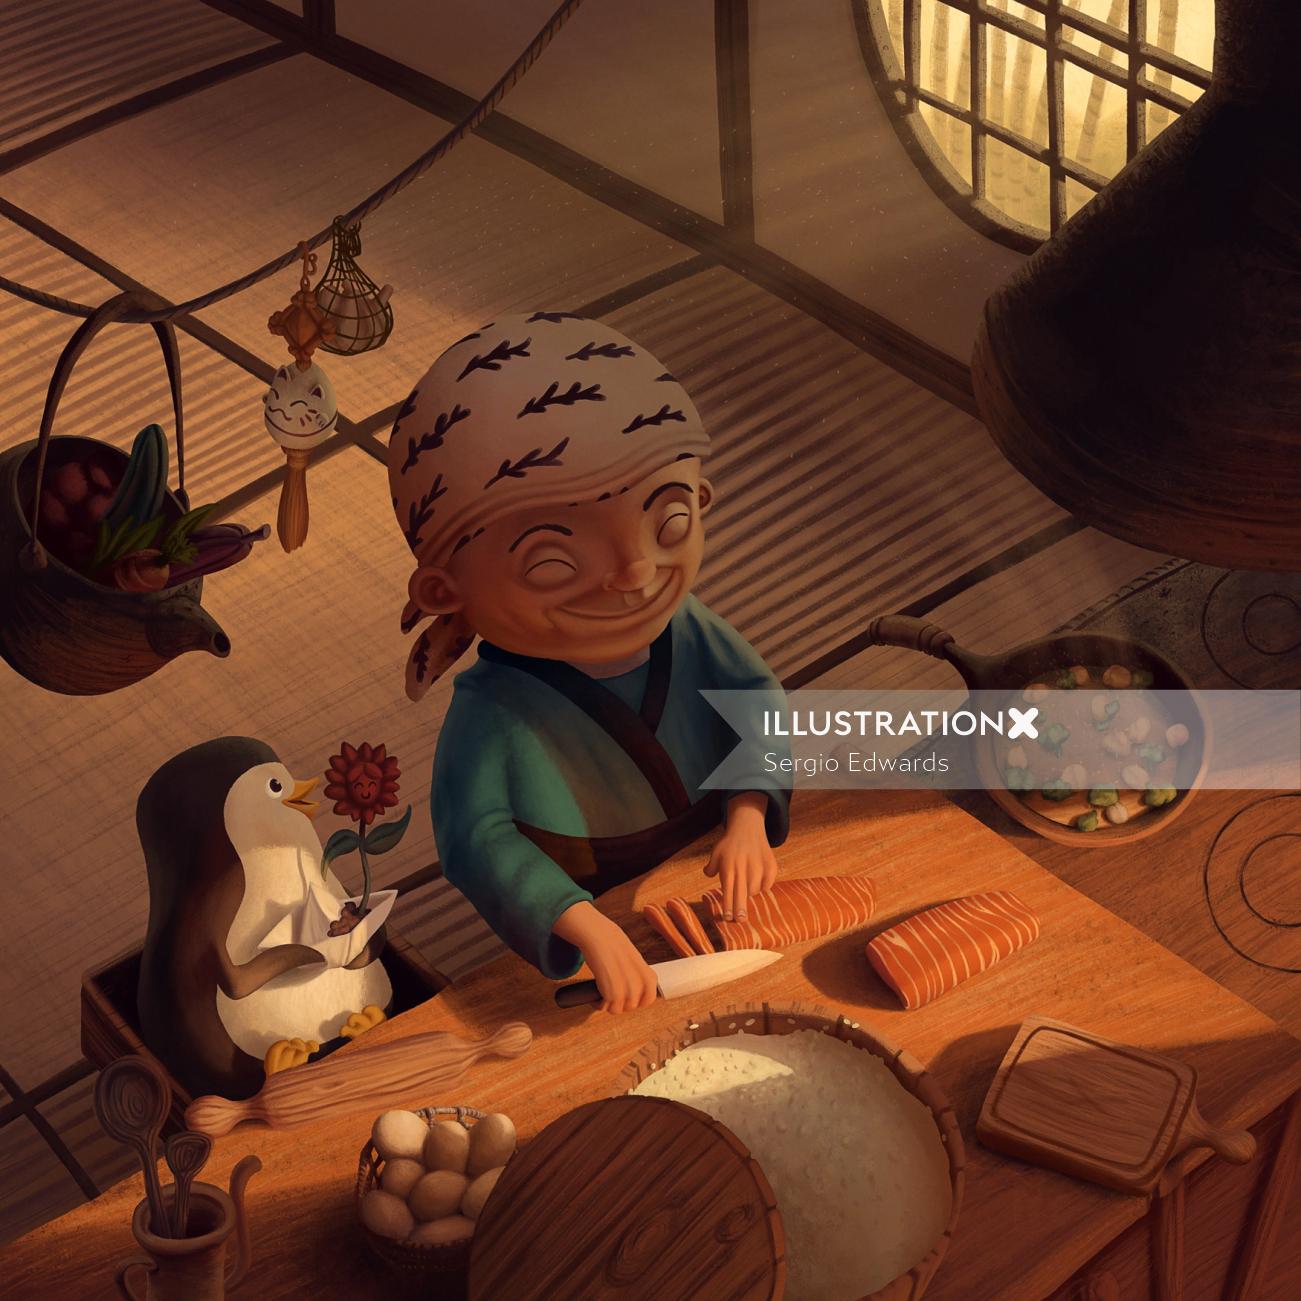 An old woman cooking animated cartoon design